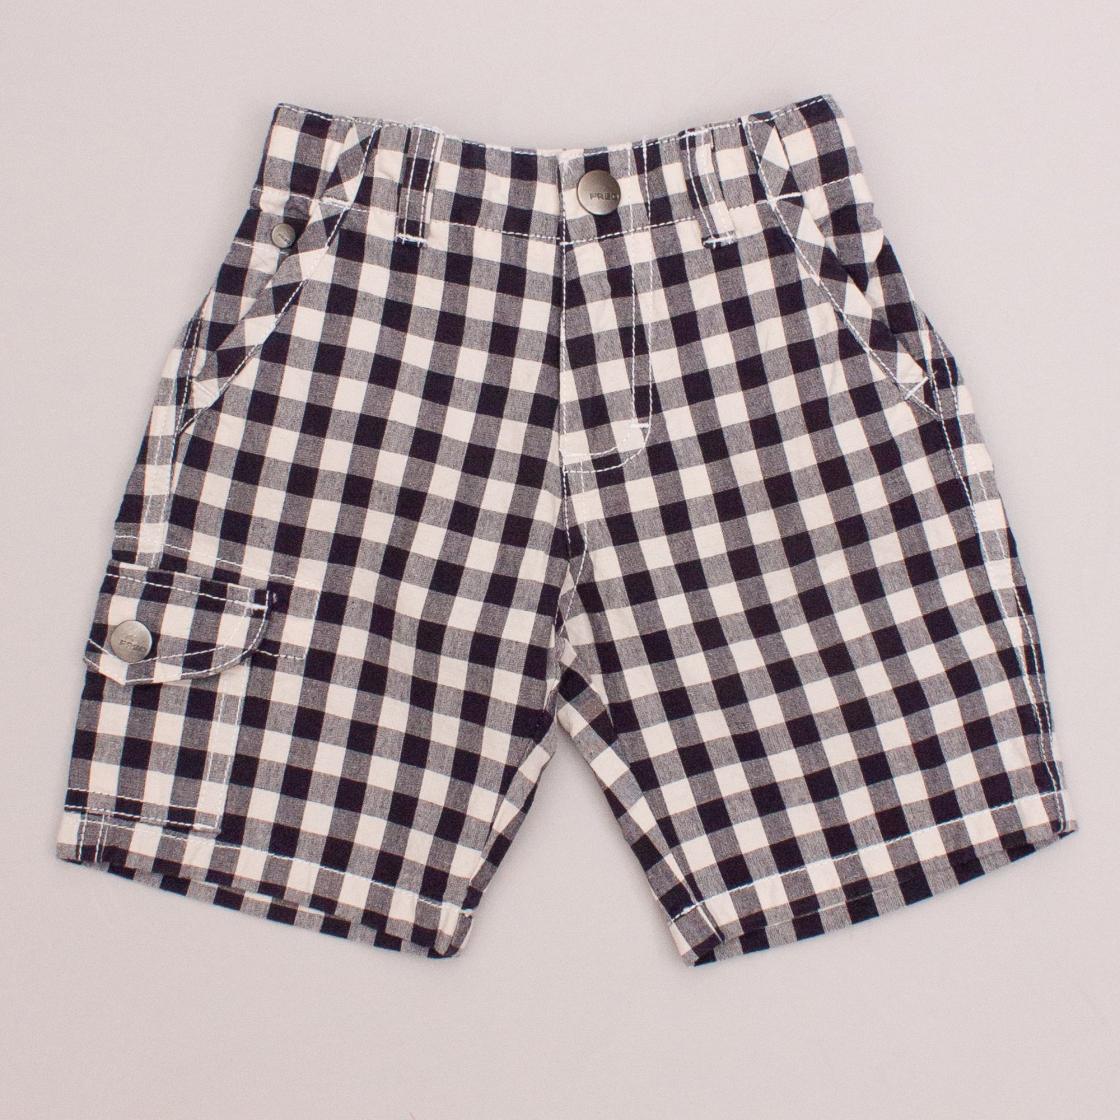 Fred Bare Check Short "Brand New"